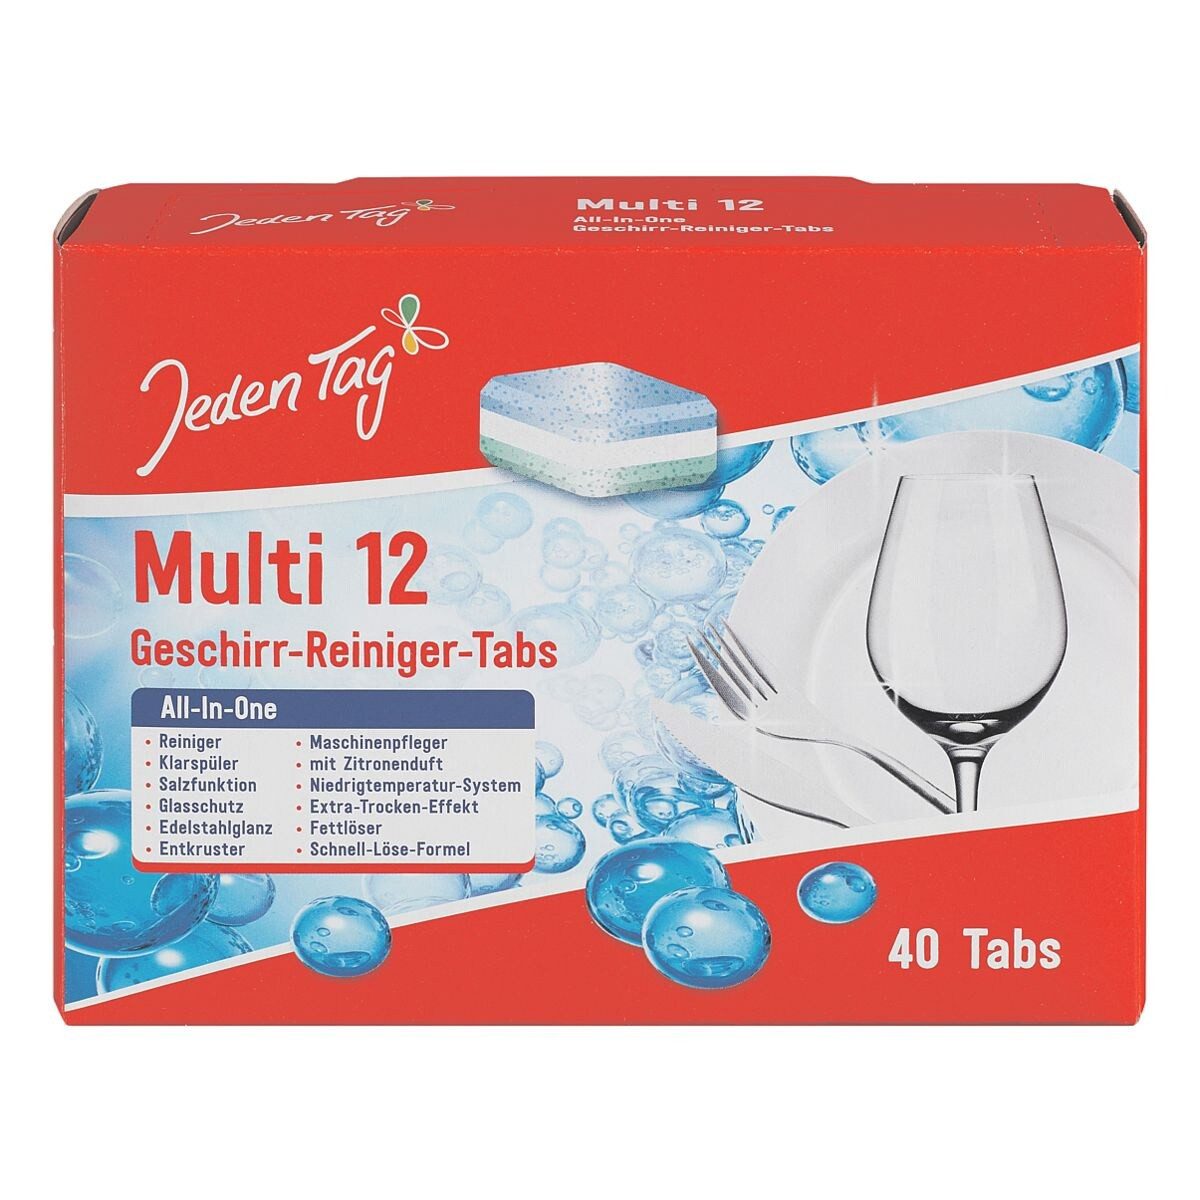 Jeden Tag Multi 12 Spülmaschinentabs (40 Tabs, All-In-One)